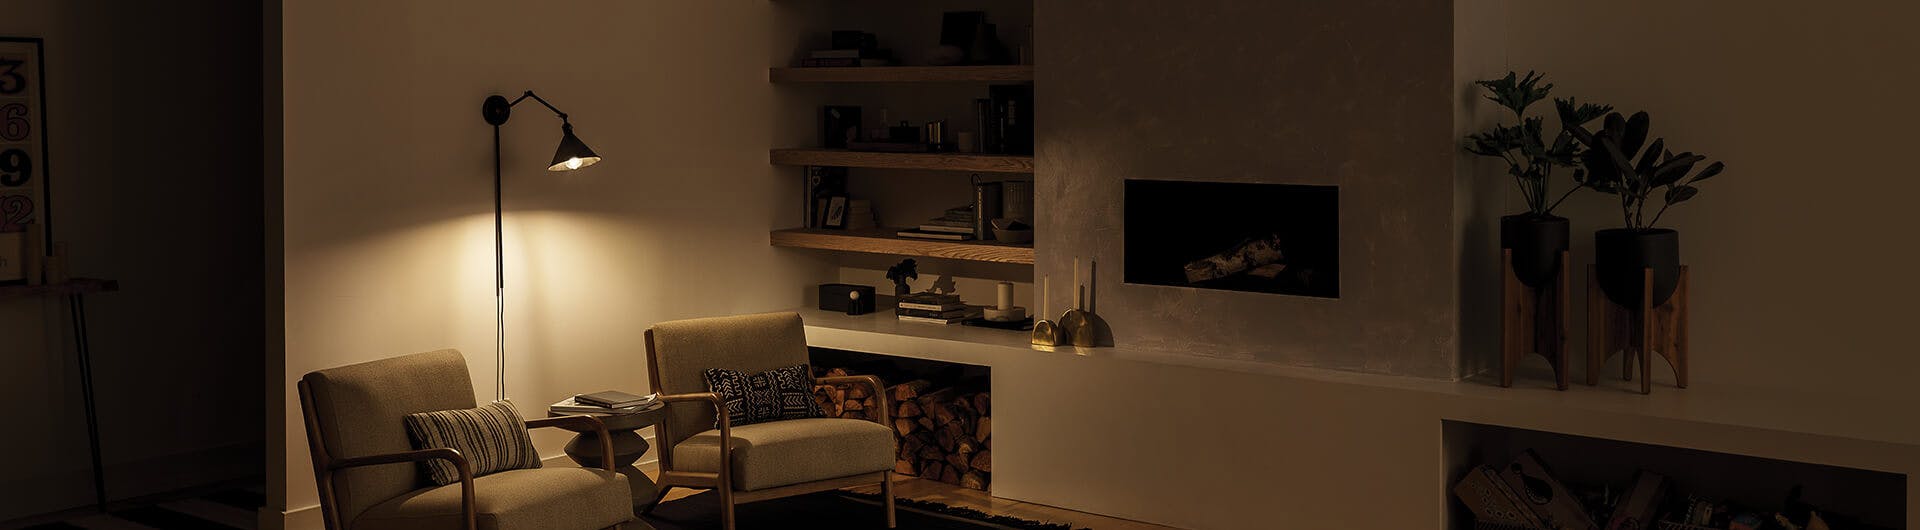 Reading nook lit with a Rosewood wall sconce and shelf lights at night 